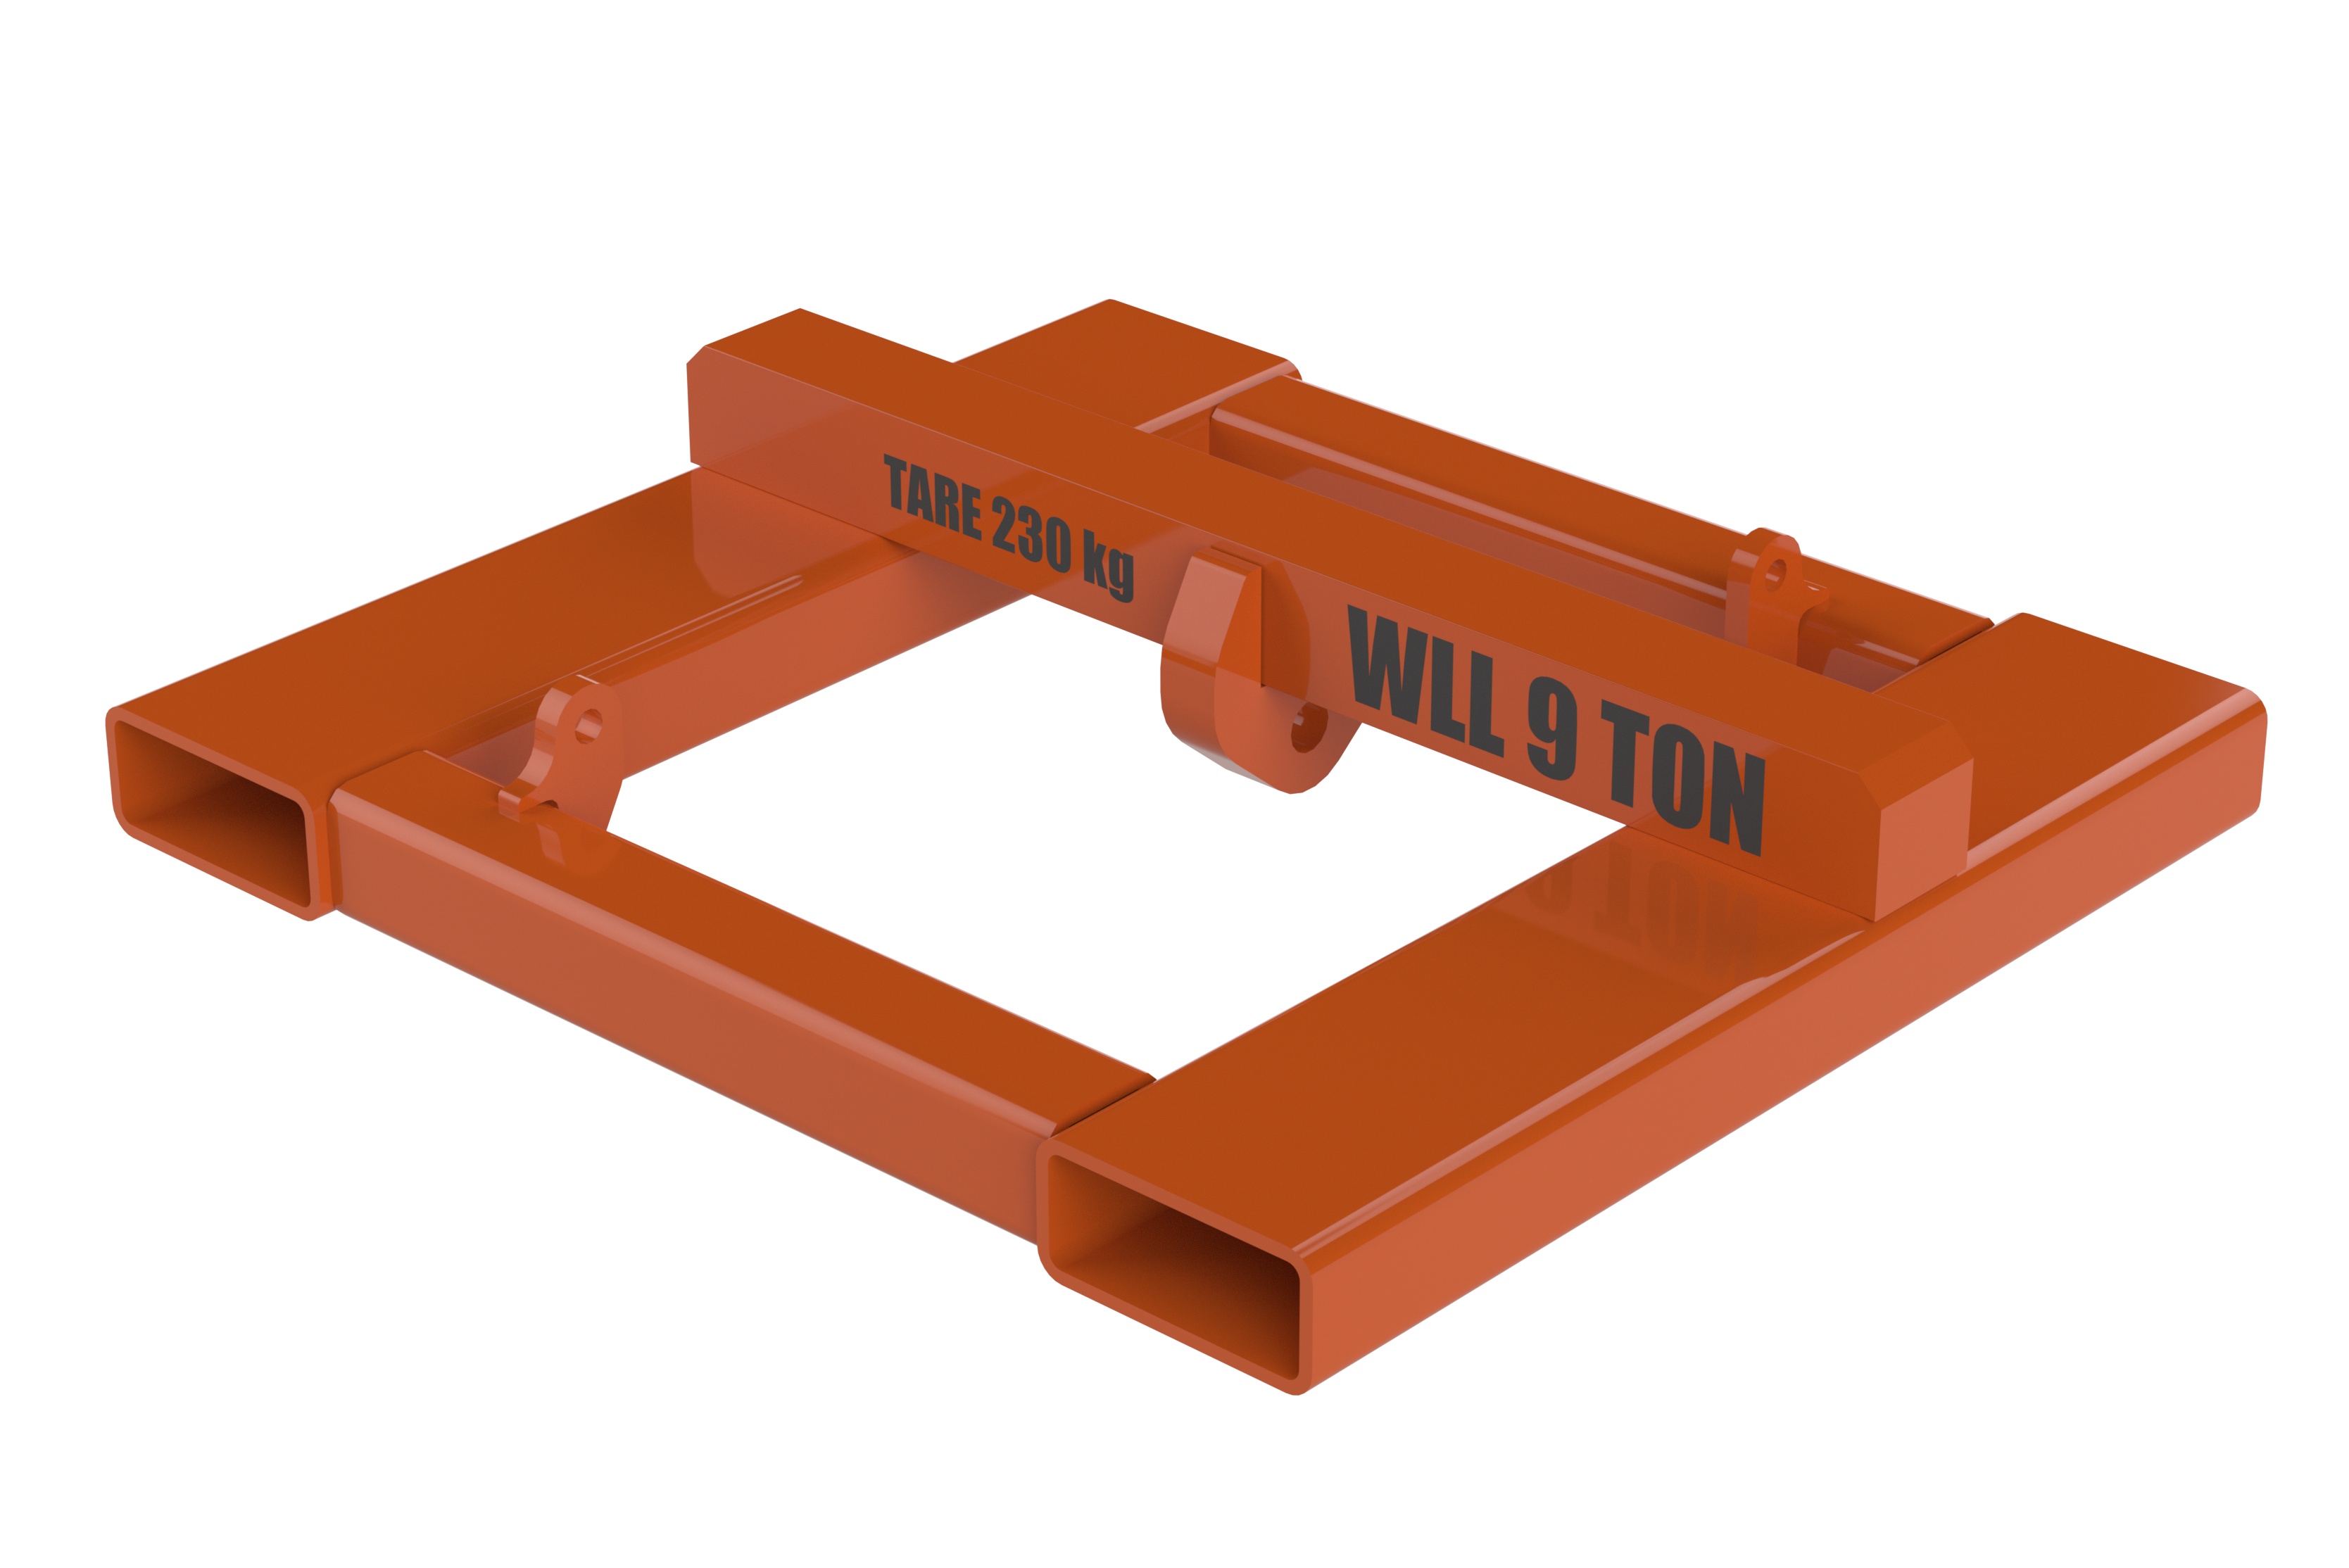 For applications in which forklifting operations are required the forklift lug provides safe and stable lifting.